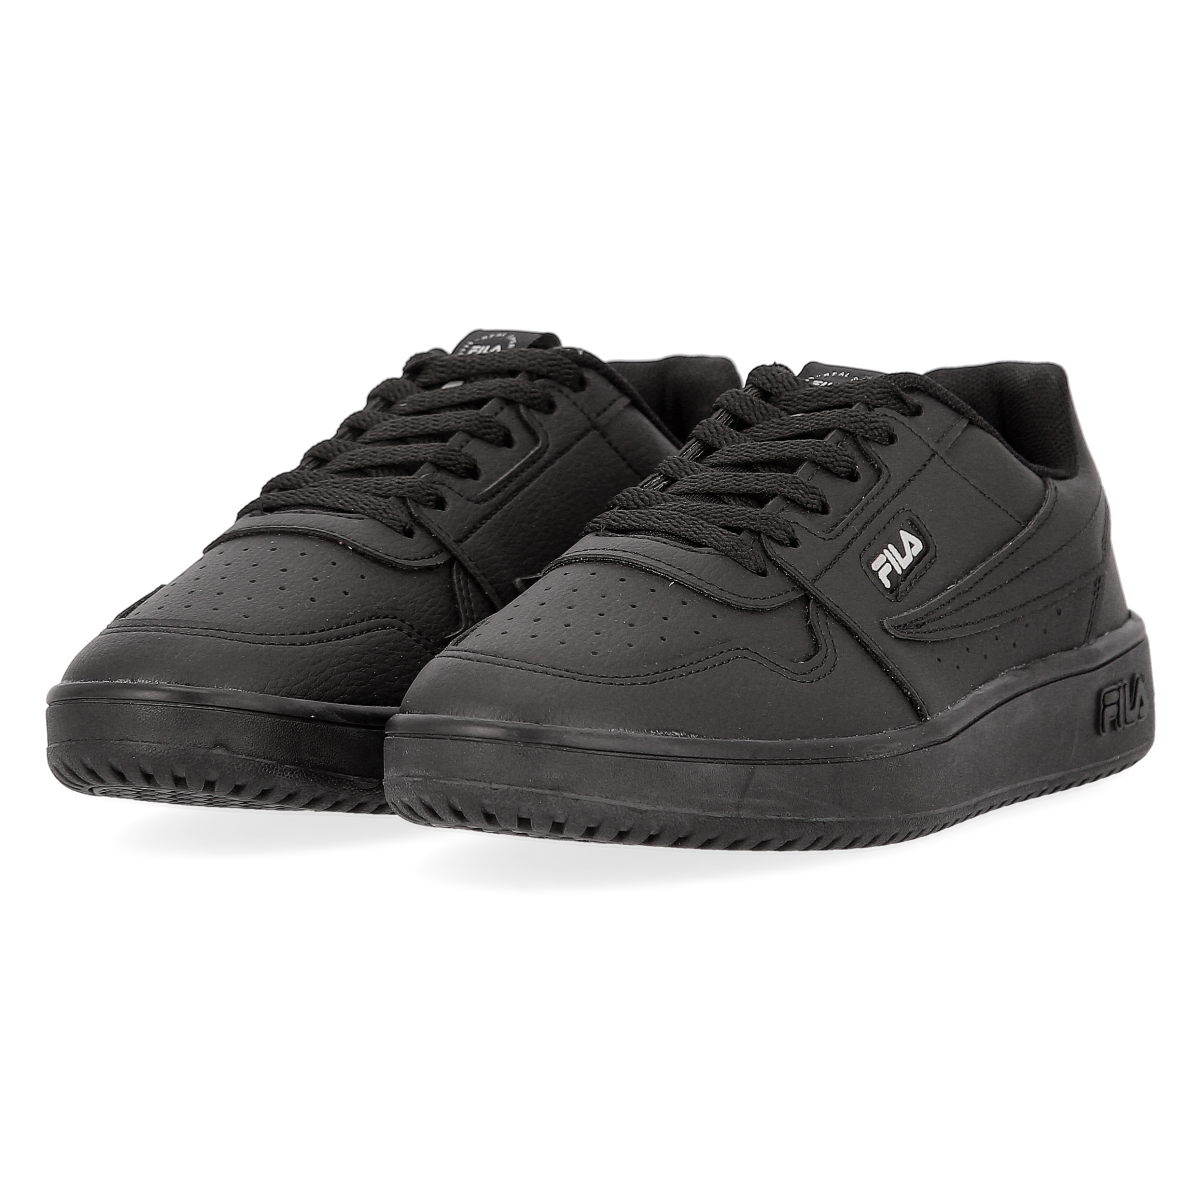 Zapatillas Fila Acd Classic Hombre,  image number null